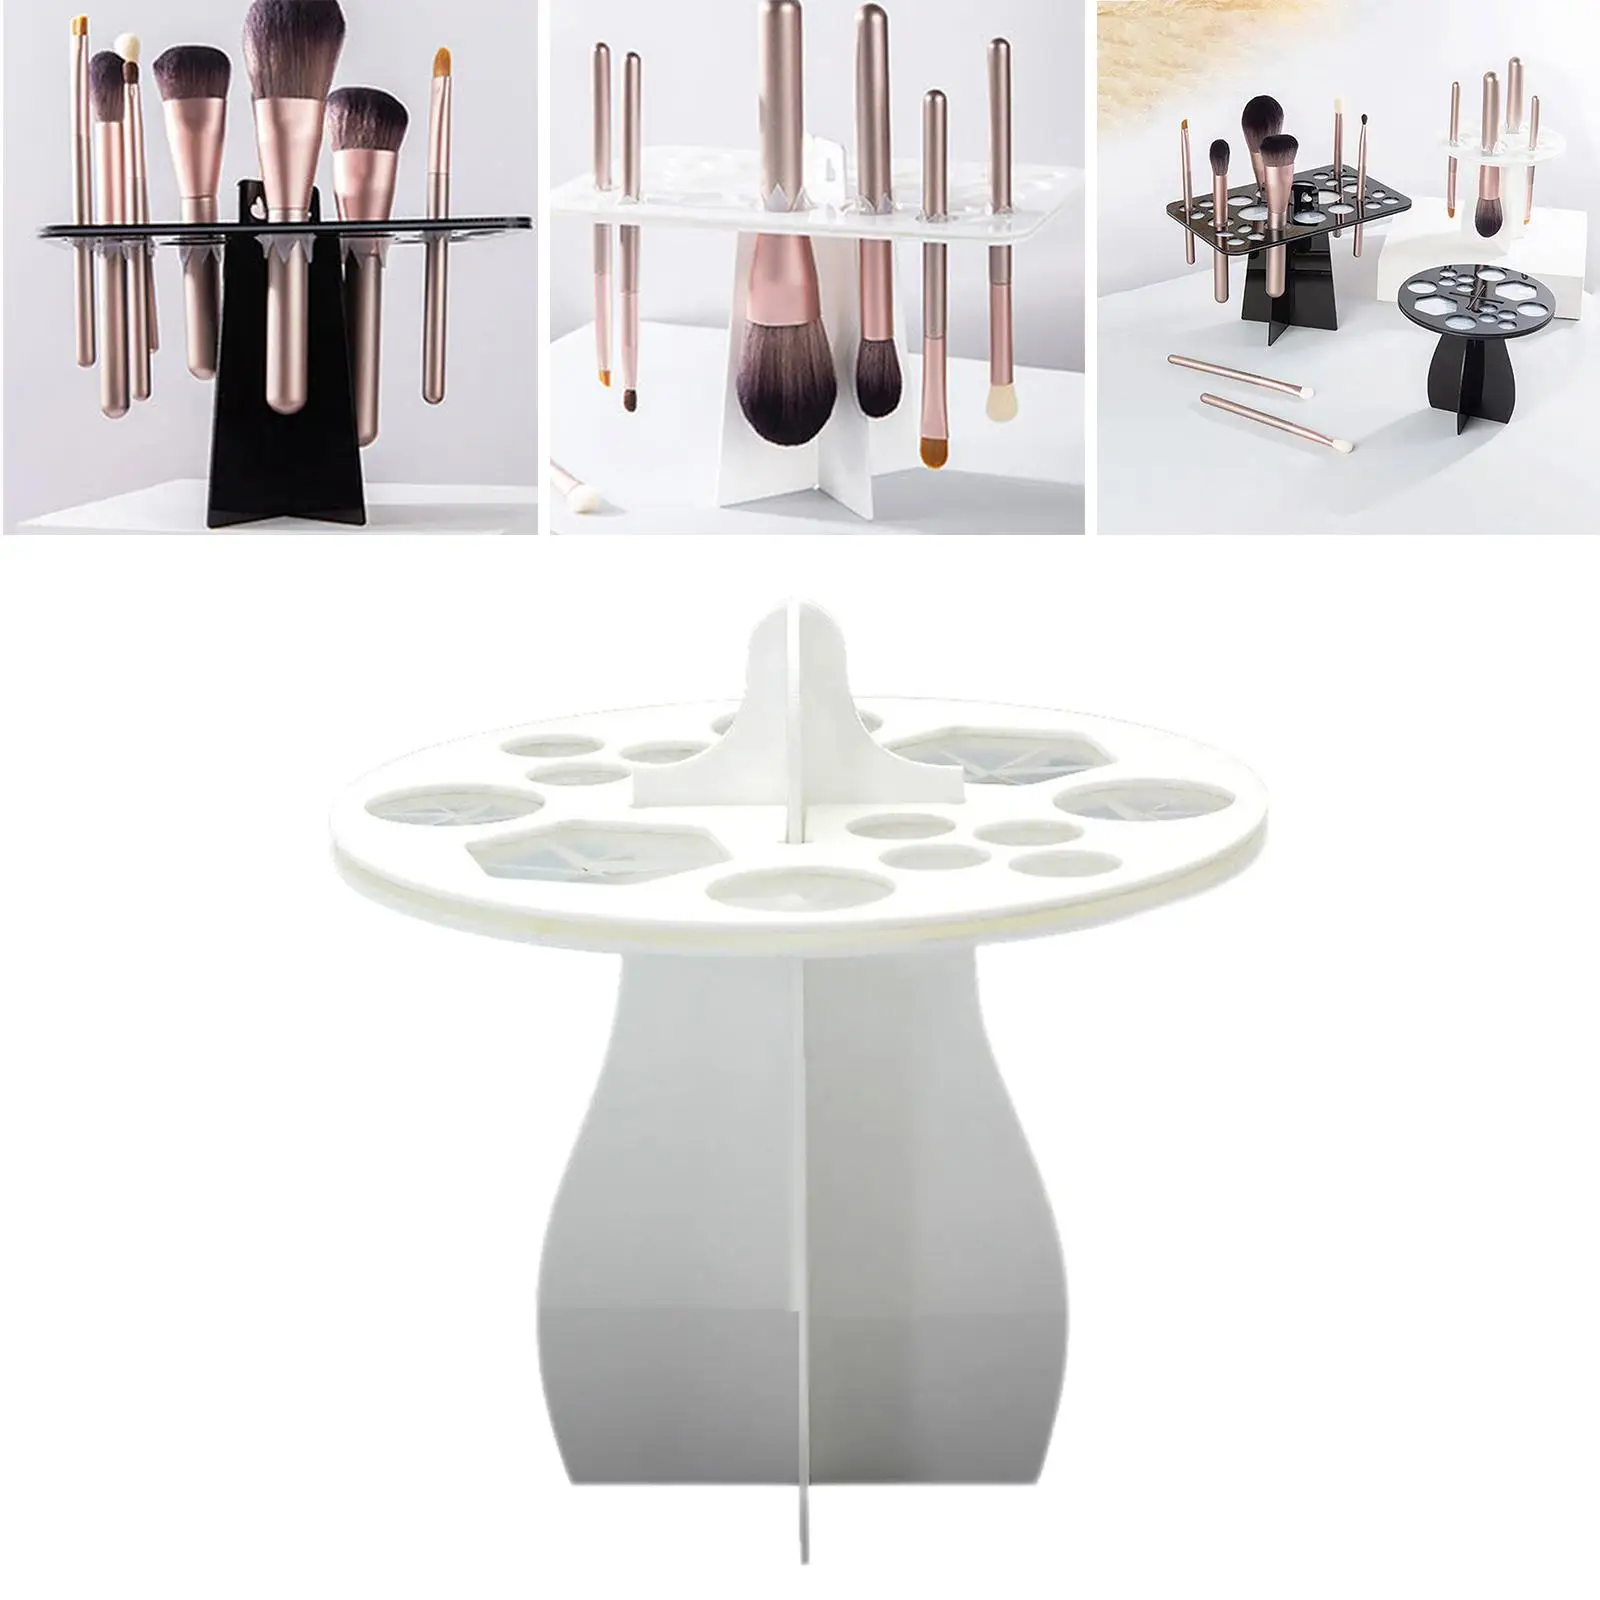 Acrylic Makeup Brushes Drying Rack, for Makeup Artist Waterproof Paint Brushes Dryer Tower Good Looking Paintbrushes Holder